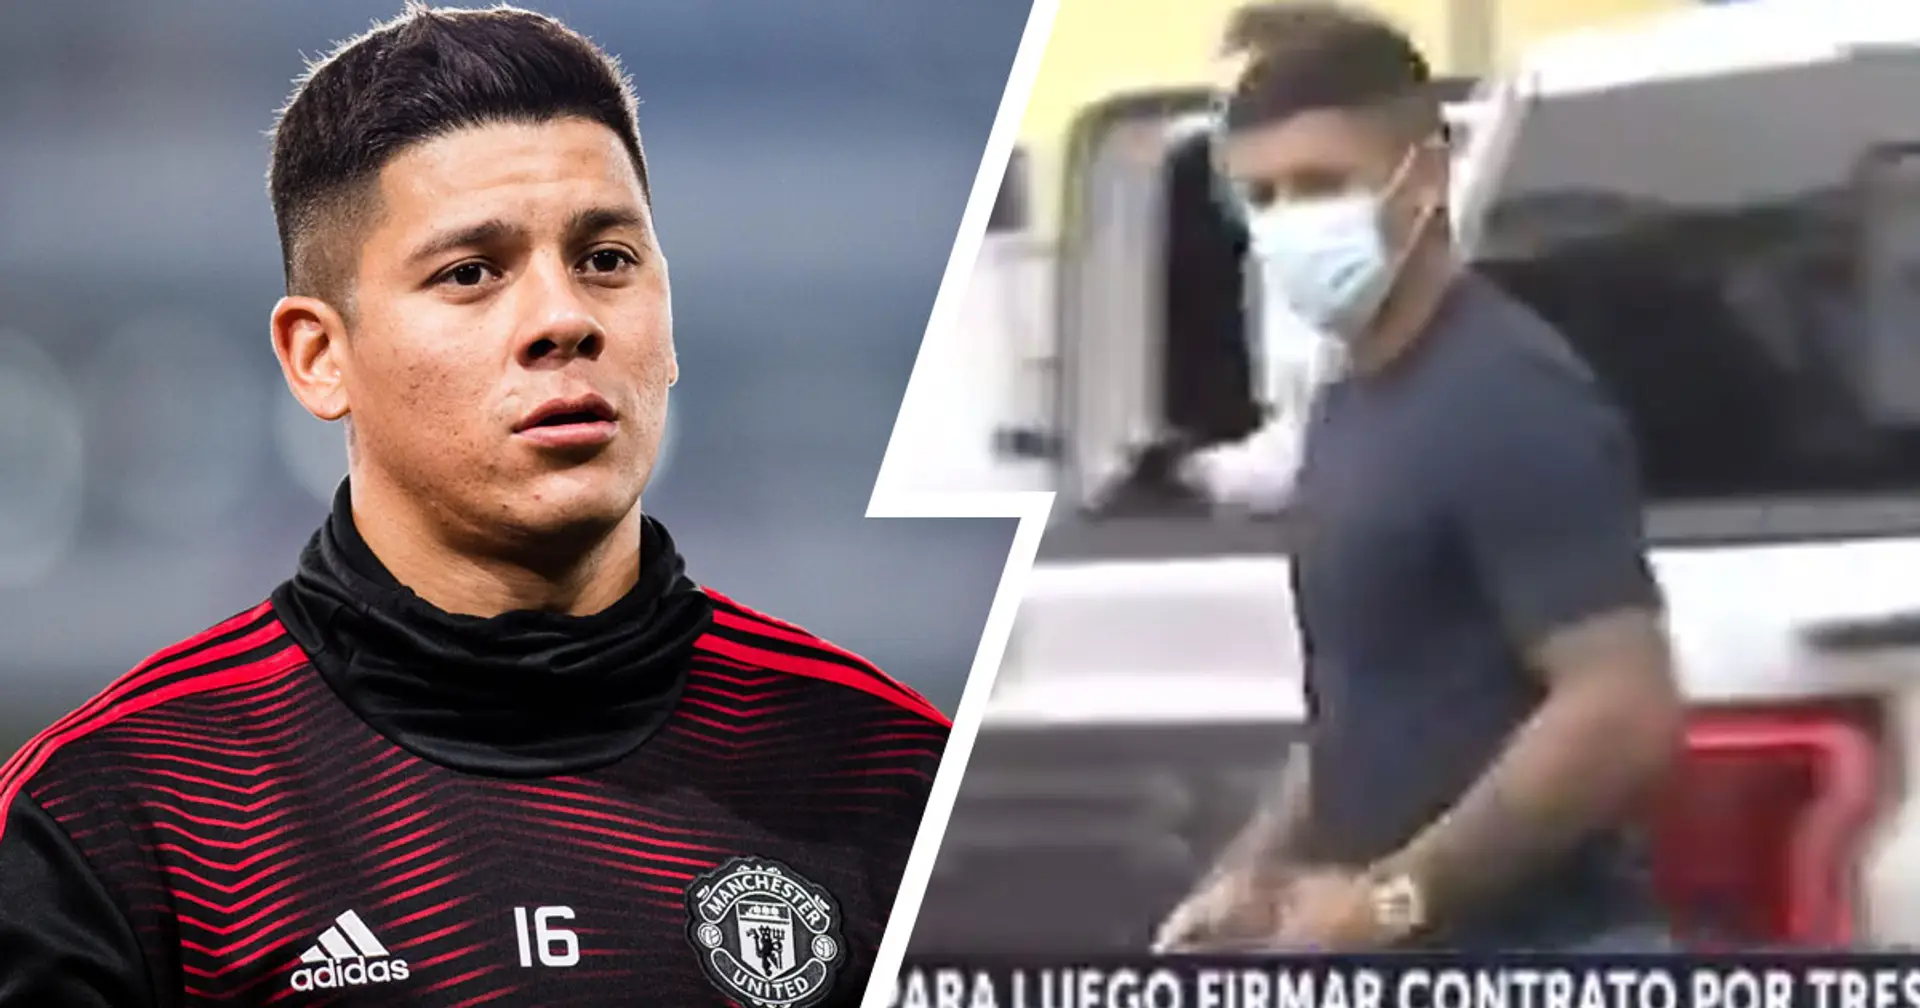 Rojo spotted arriving at Boca Juniors’ training ground ahead of medical